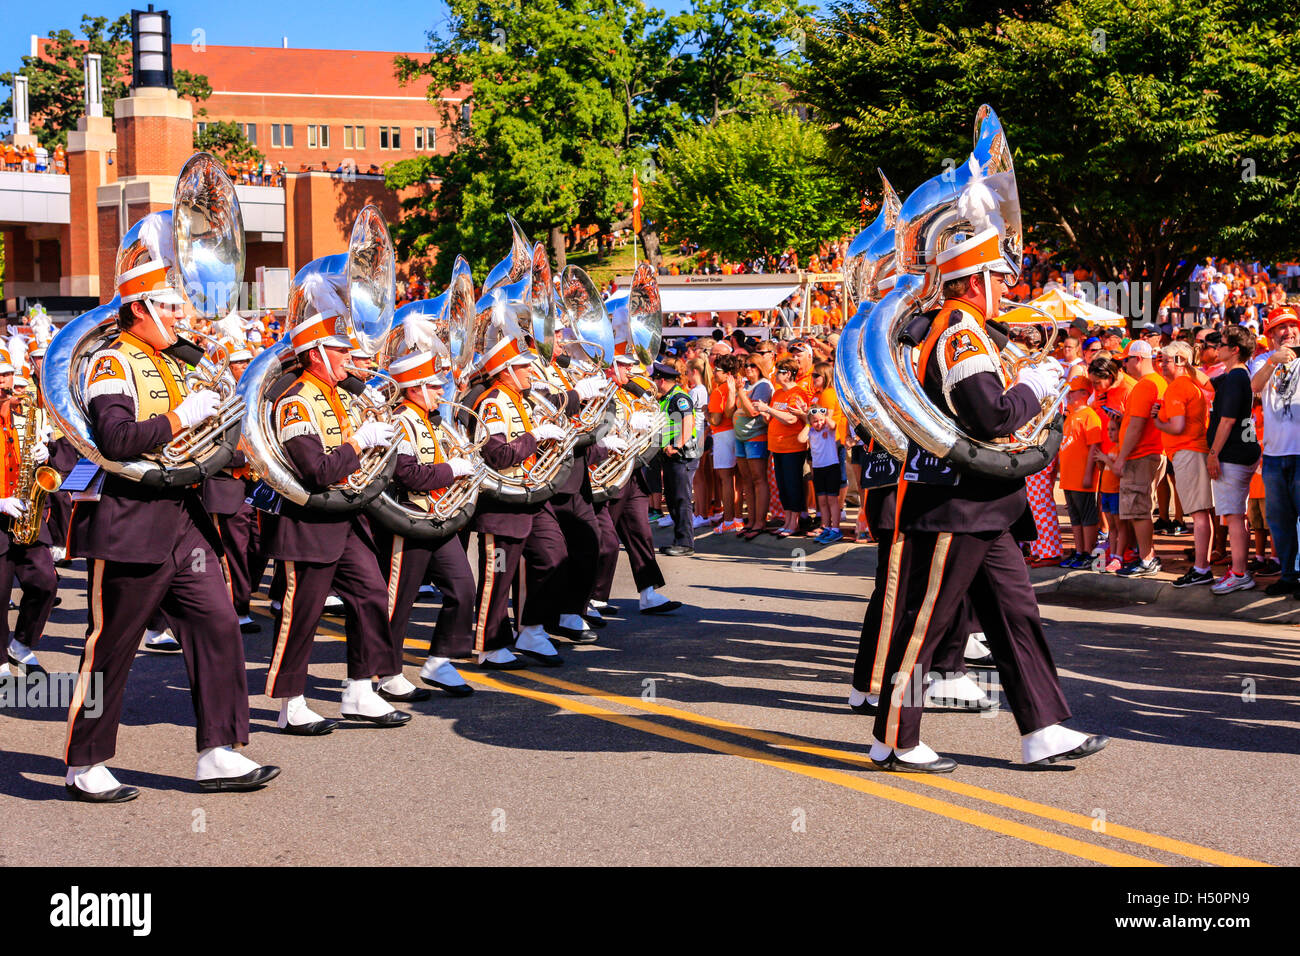 Der Stolz der Southland Marching Band, offizieller Name der Band University of Tennessee in Knoxville TN Stockfoto